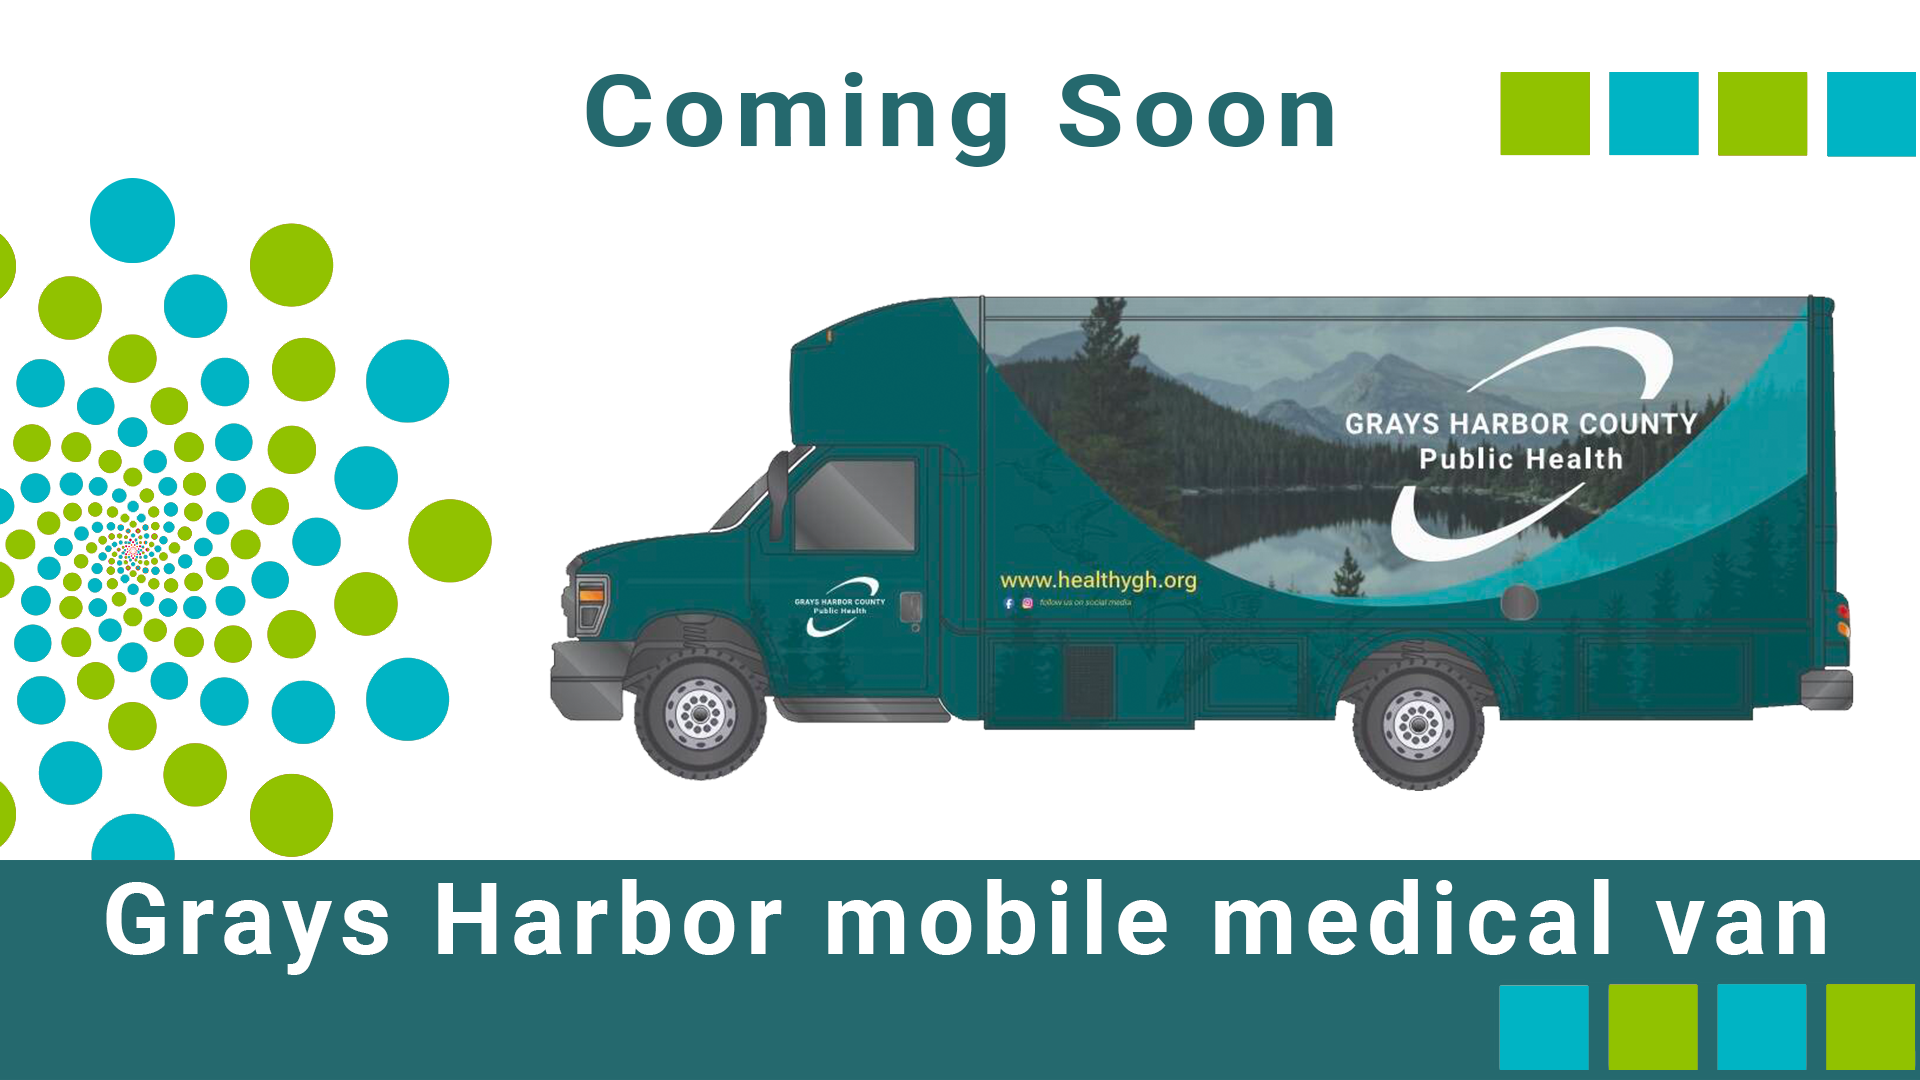 Learn more about our mobile medical van